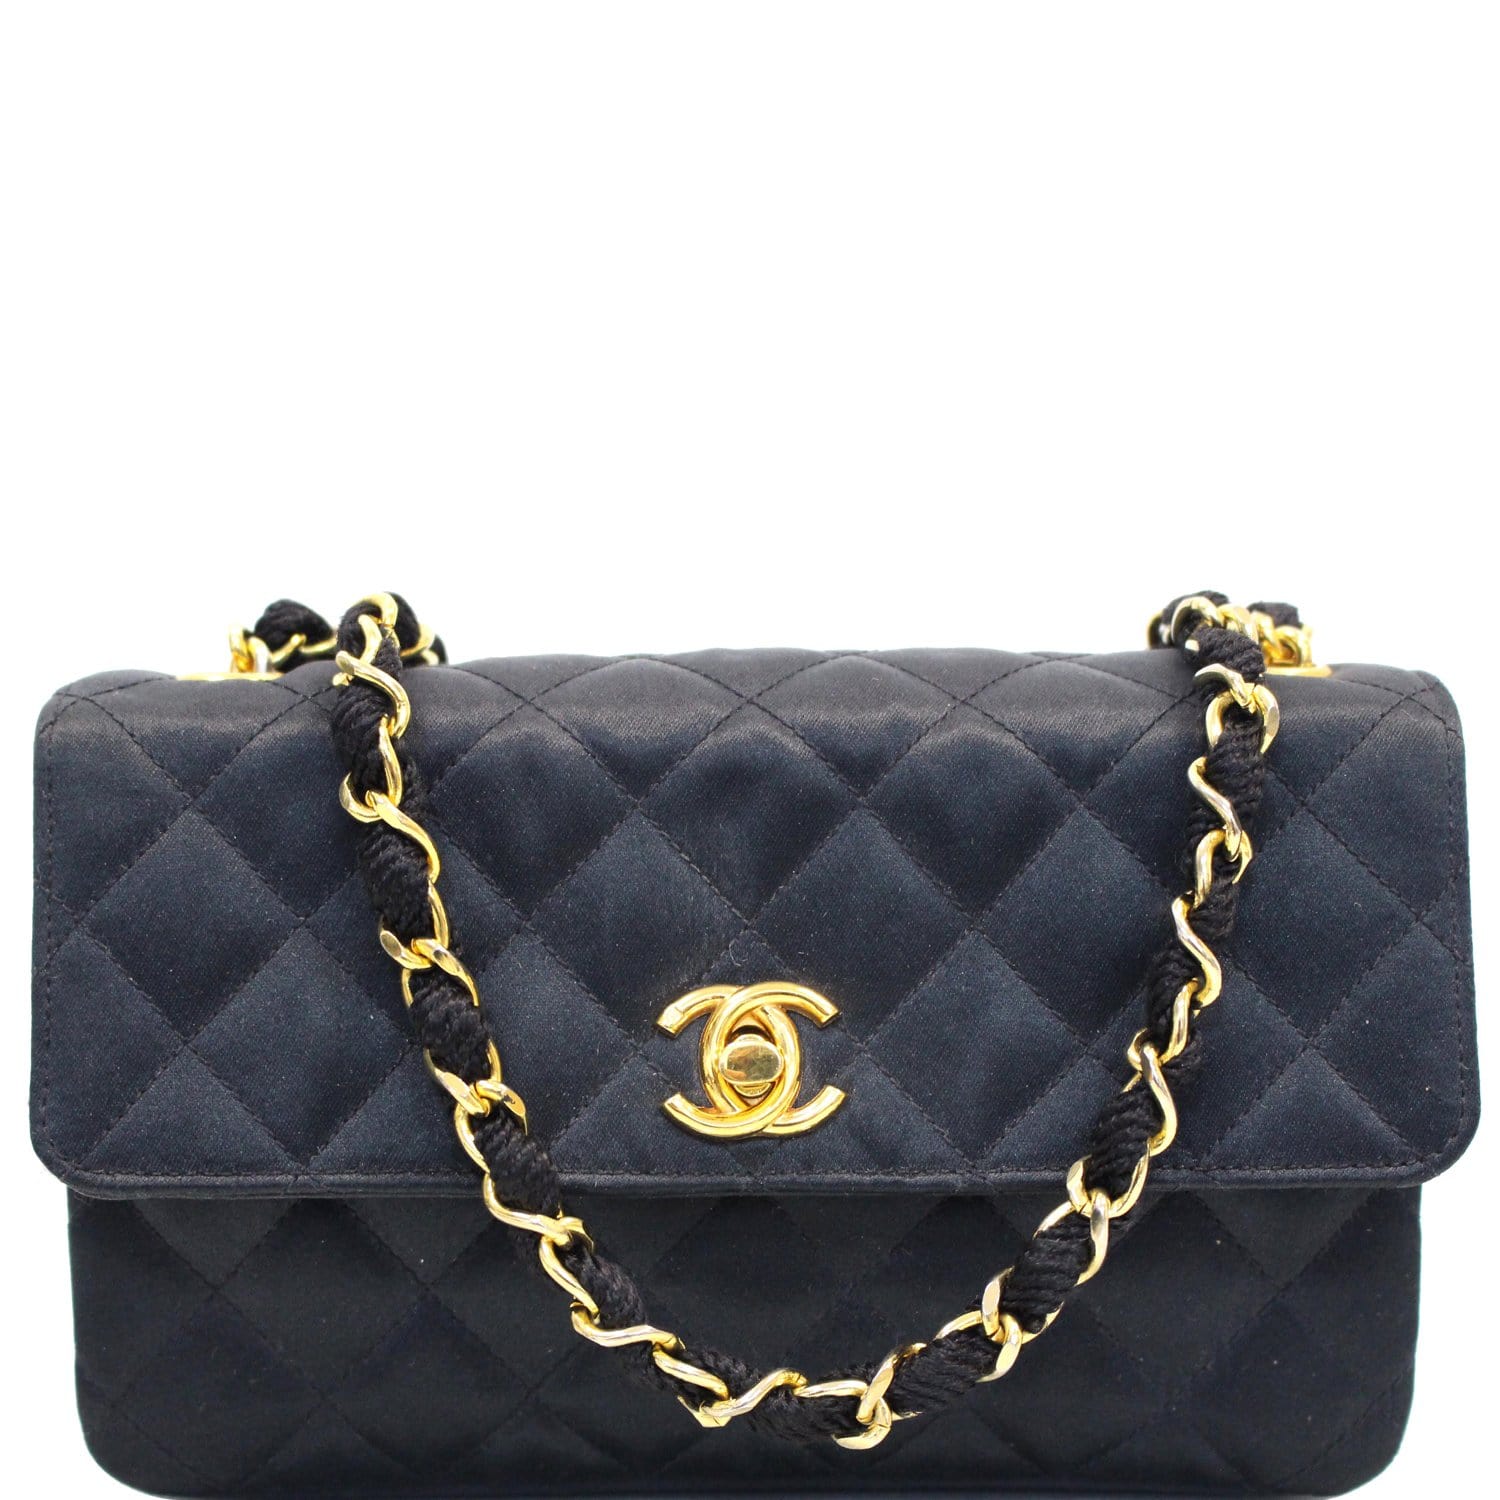 Chanel Timeless Classique small bag, Purse Black Leather ref